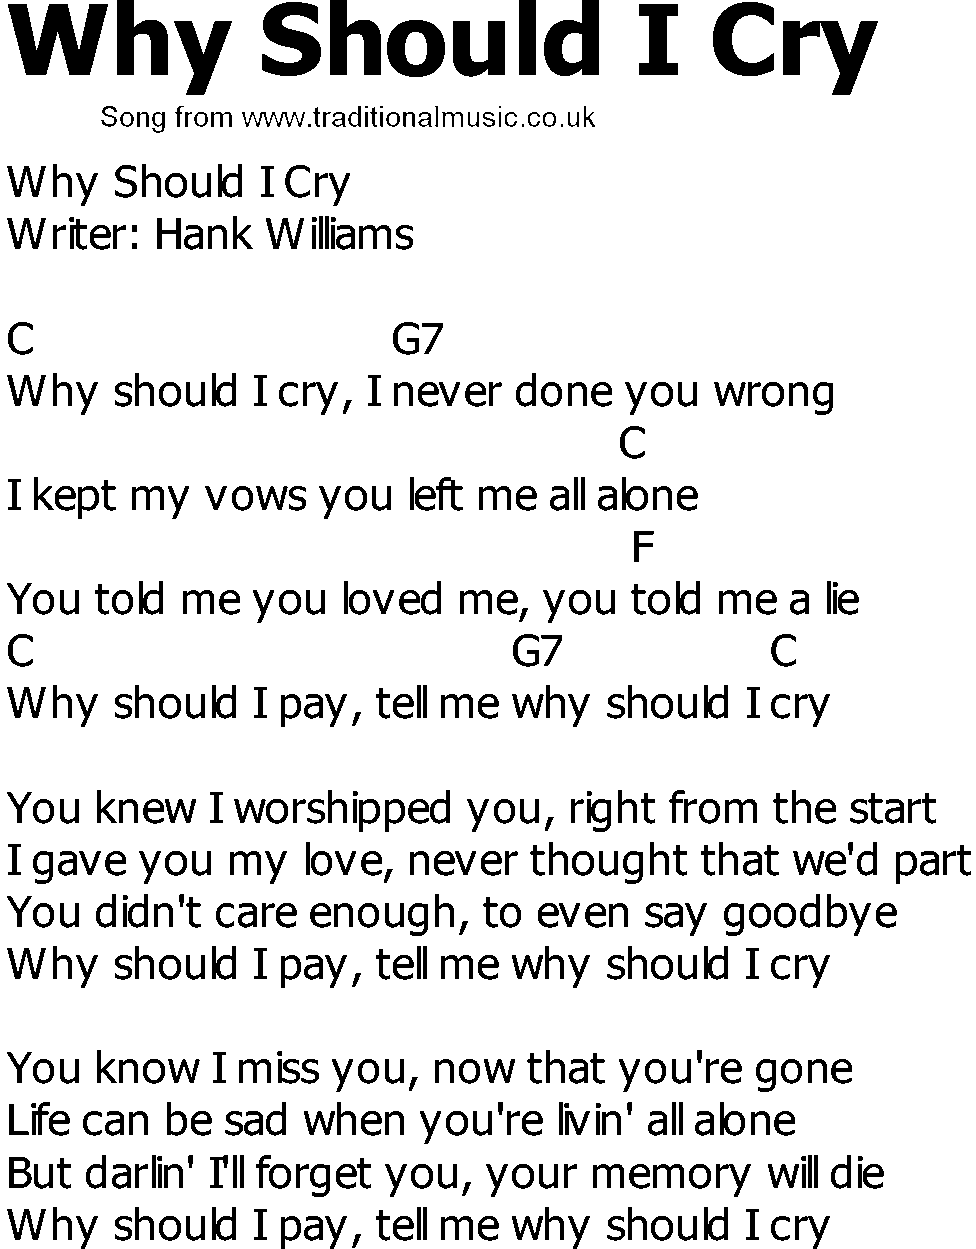 Old Country song lyrics with chords - Why Should I Cry